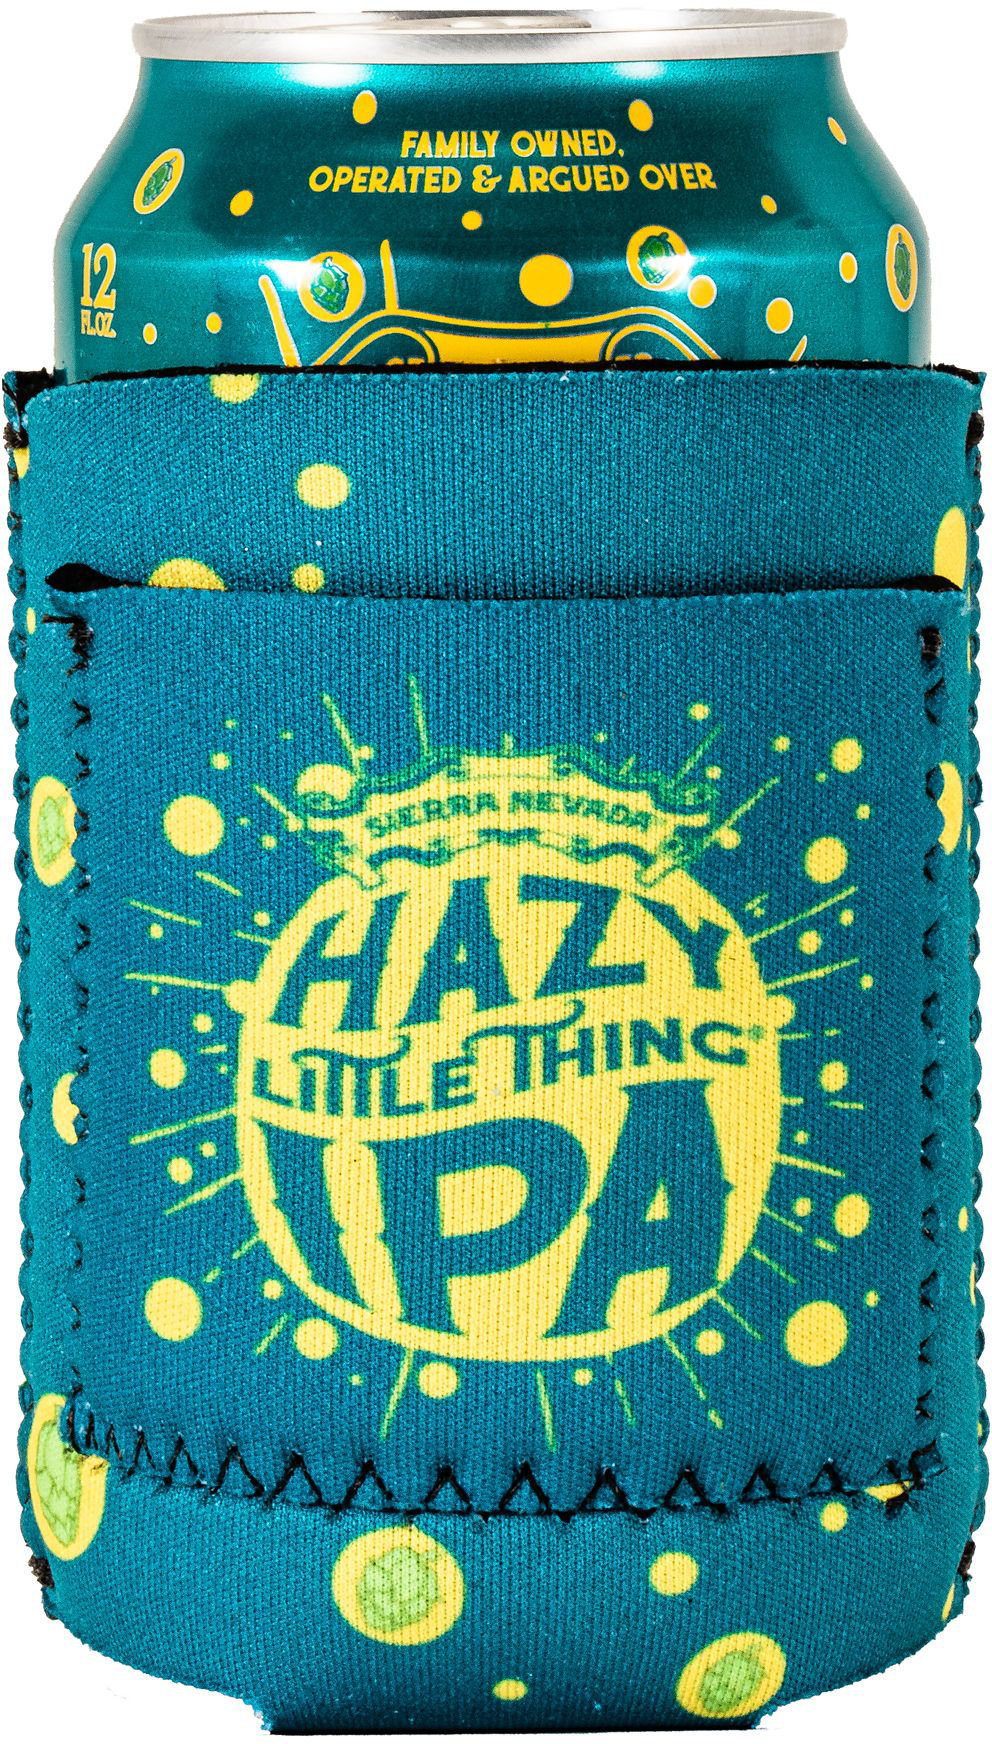 Hazy Little Thing Stash Pocket Beer Holder featuring a can inside